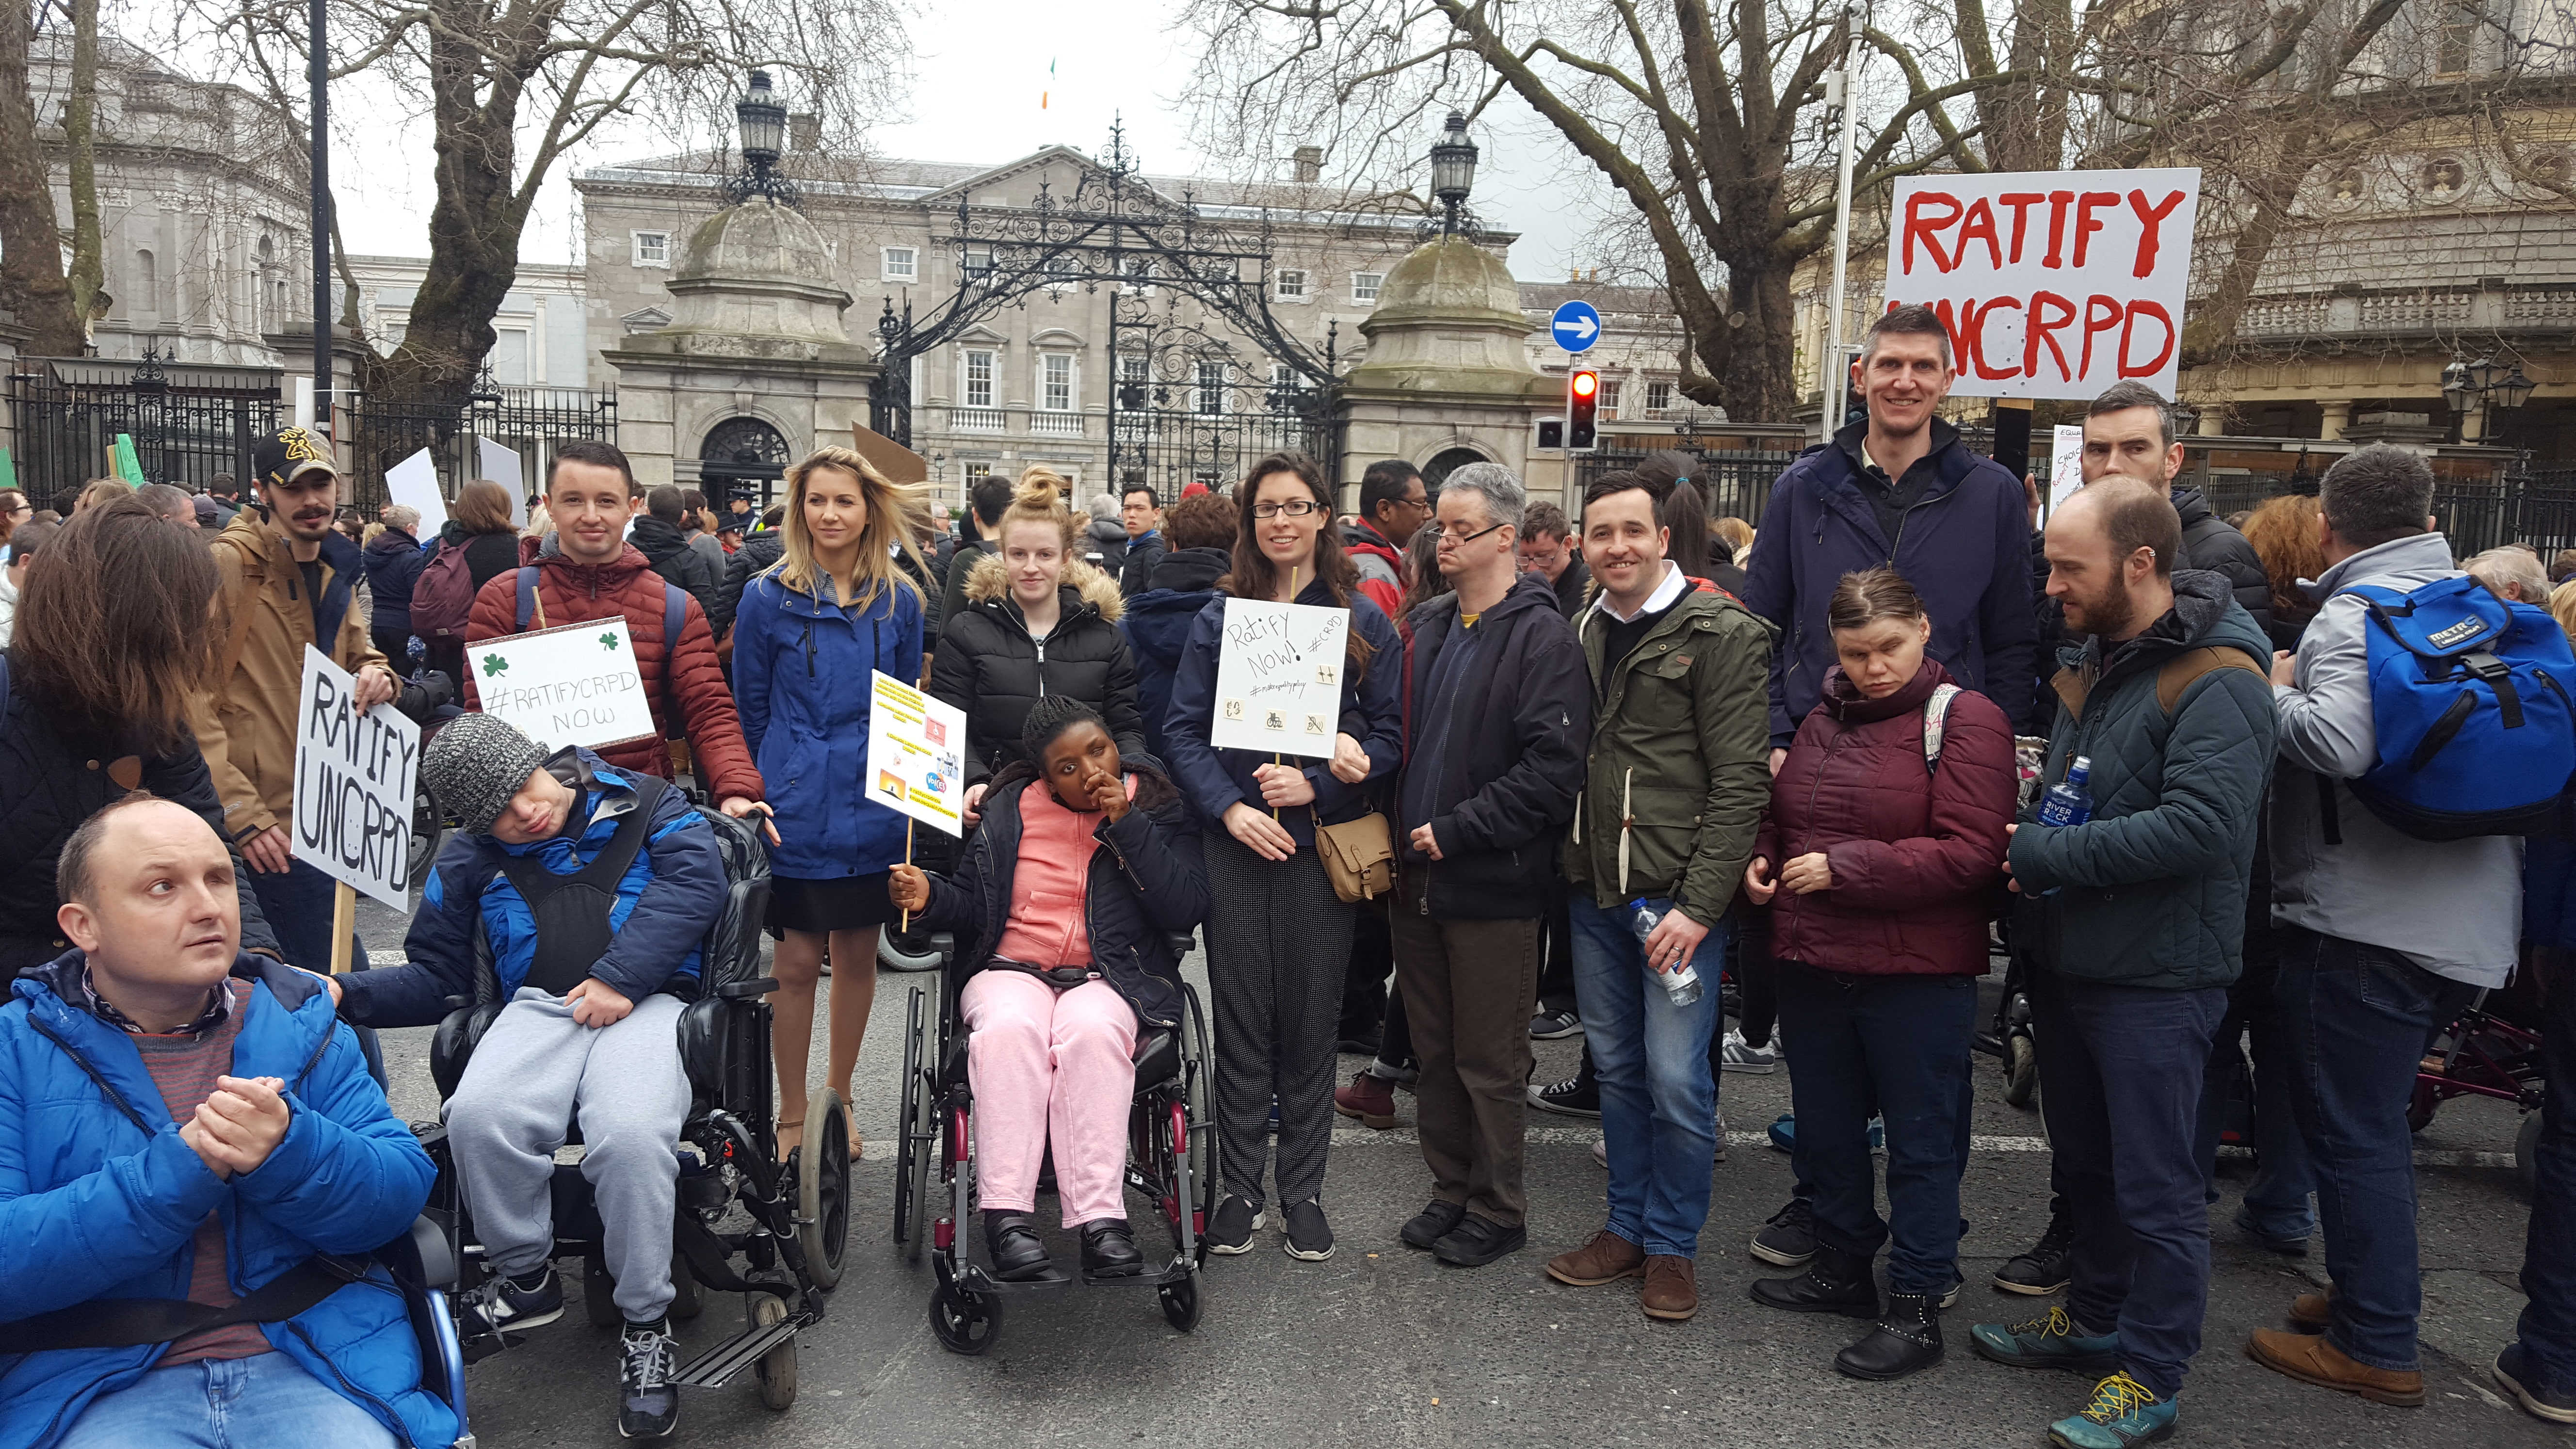 Staff and service users gathered outside government buildings in Dublin, holding signs, at a ratify UNCRPD protest.